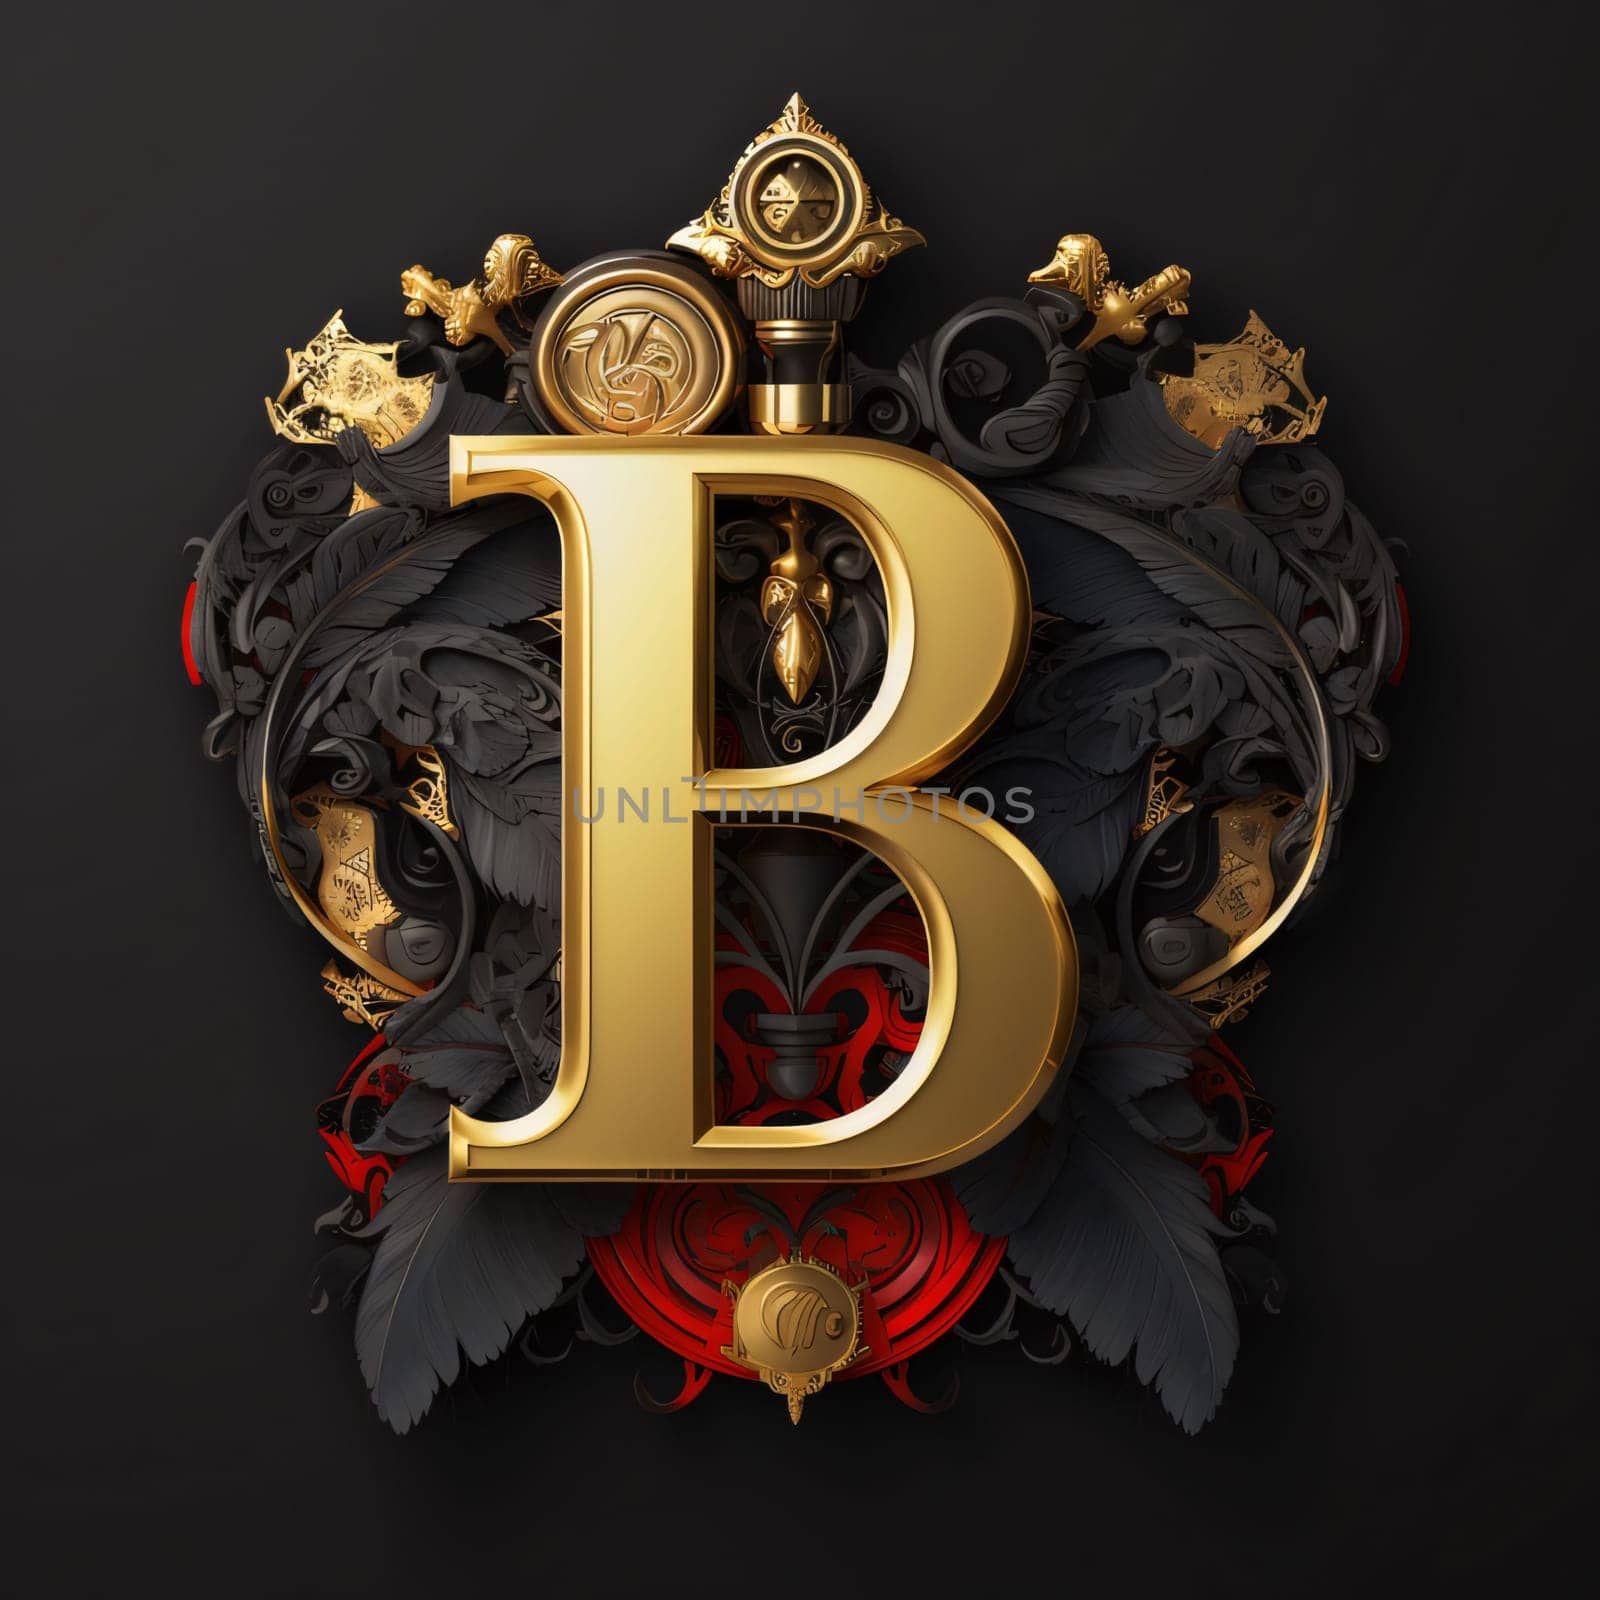 Graphic alphabet letters: Golden letter B with a crown on a black background. 3D illustration